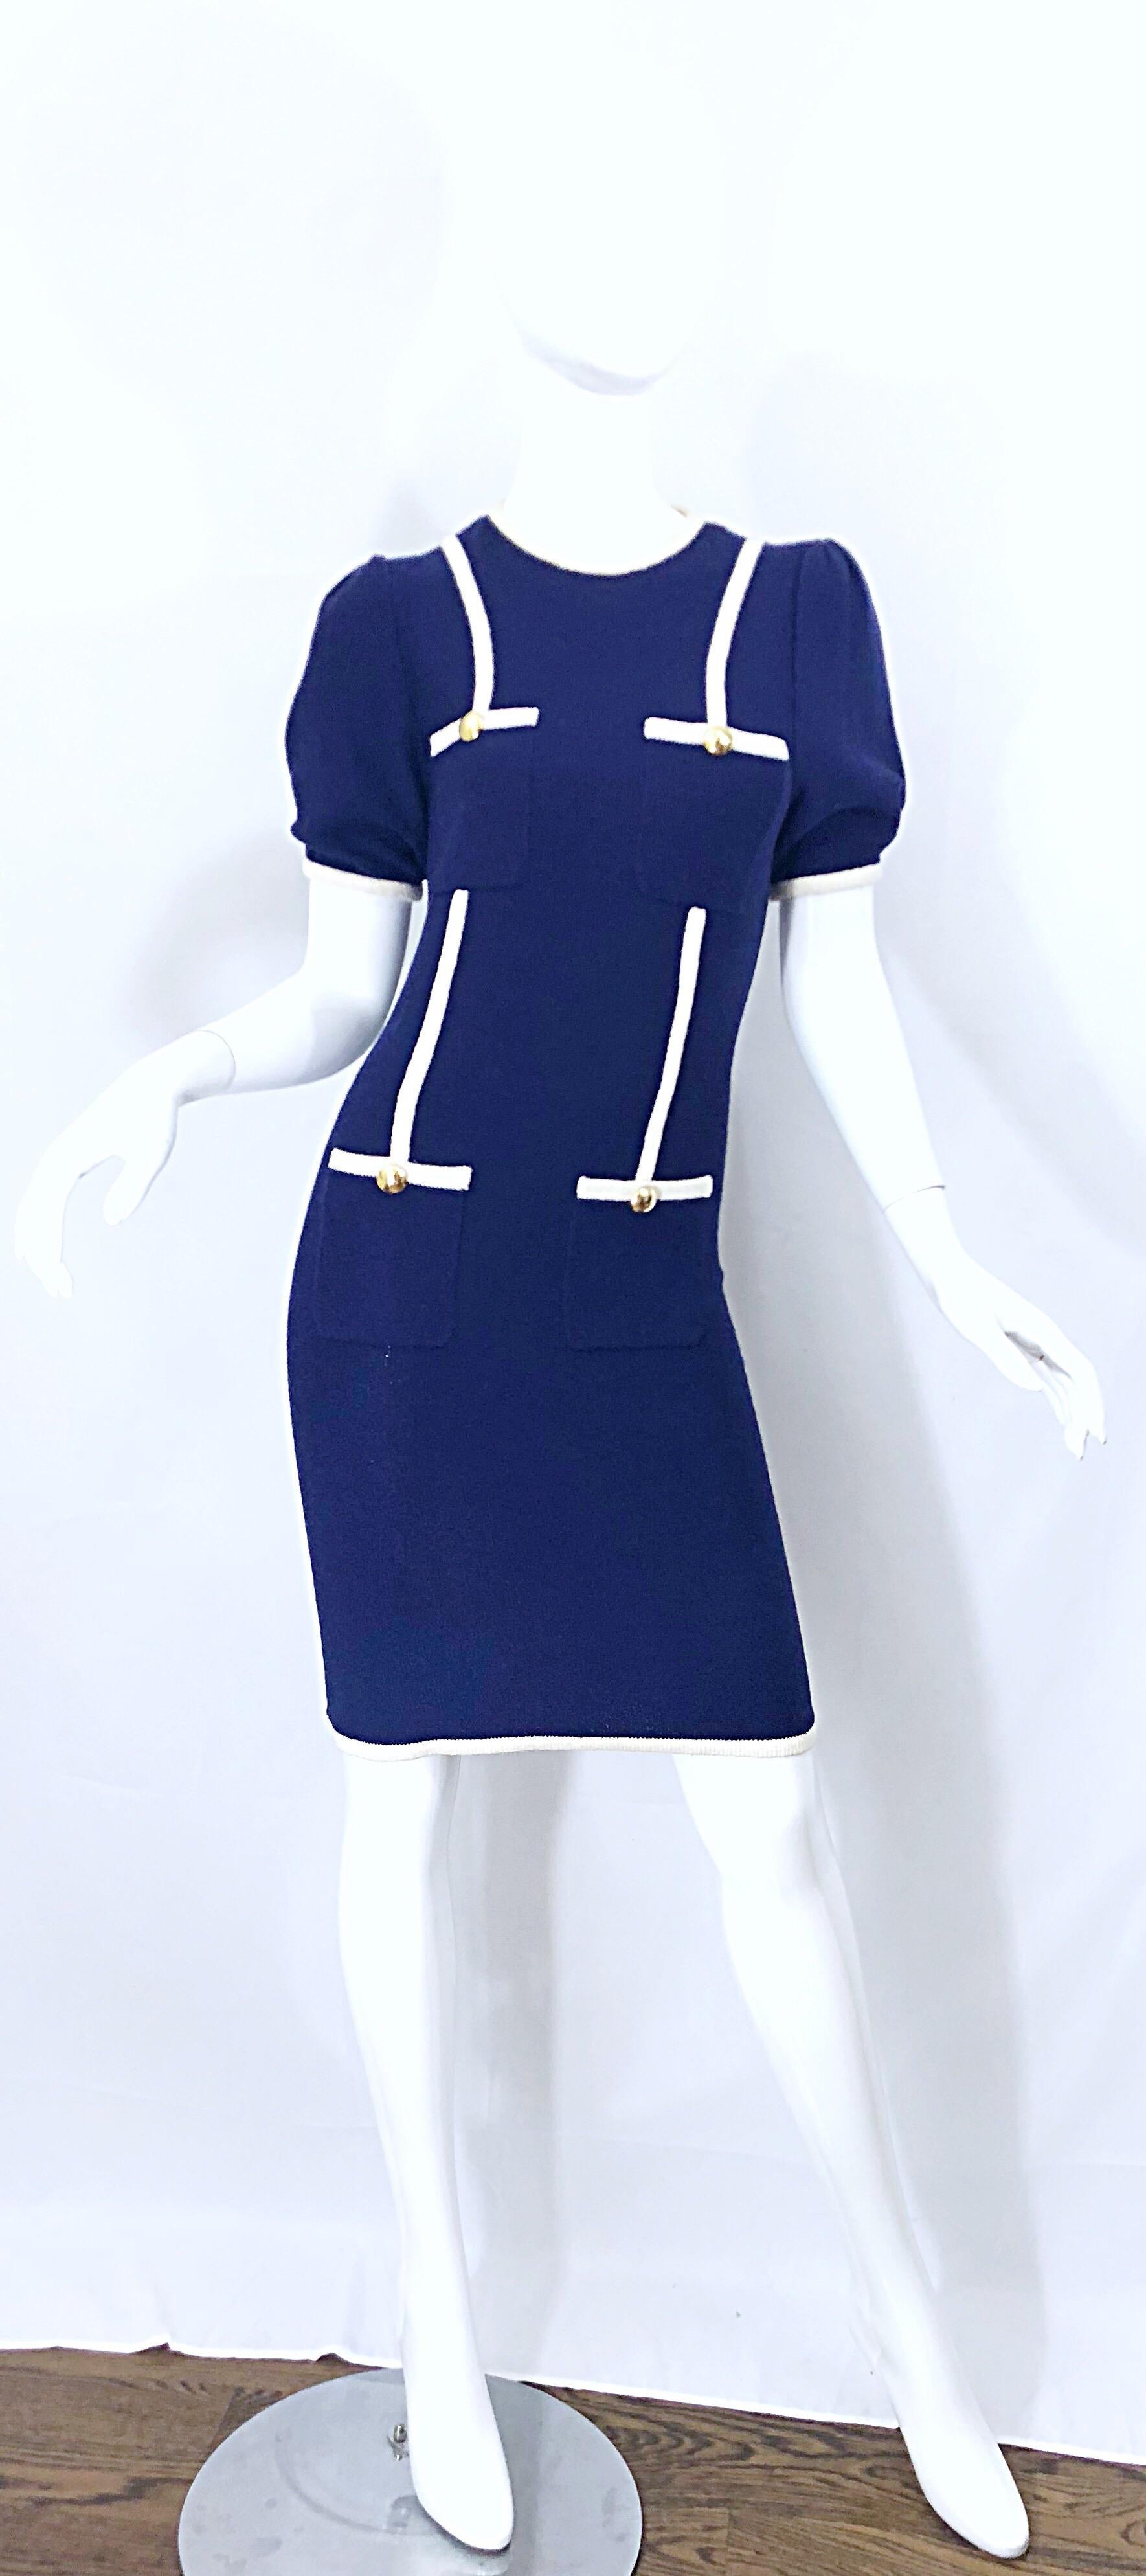 Vintage Adolfo for Saks 5th Avenue Navy Blue and White Nautical Knit Dress 9